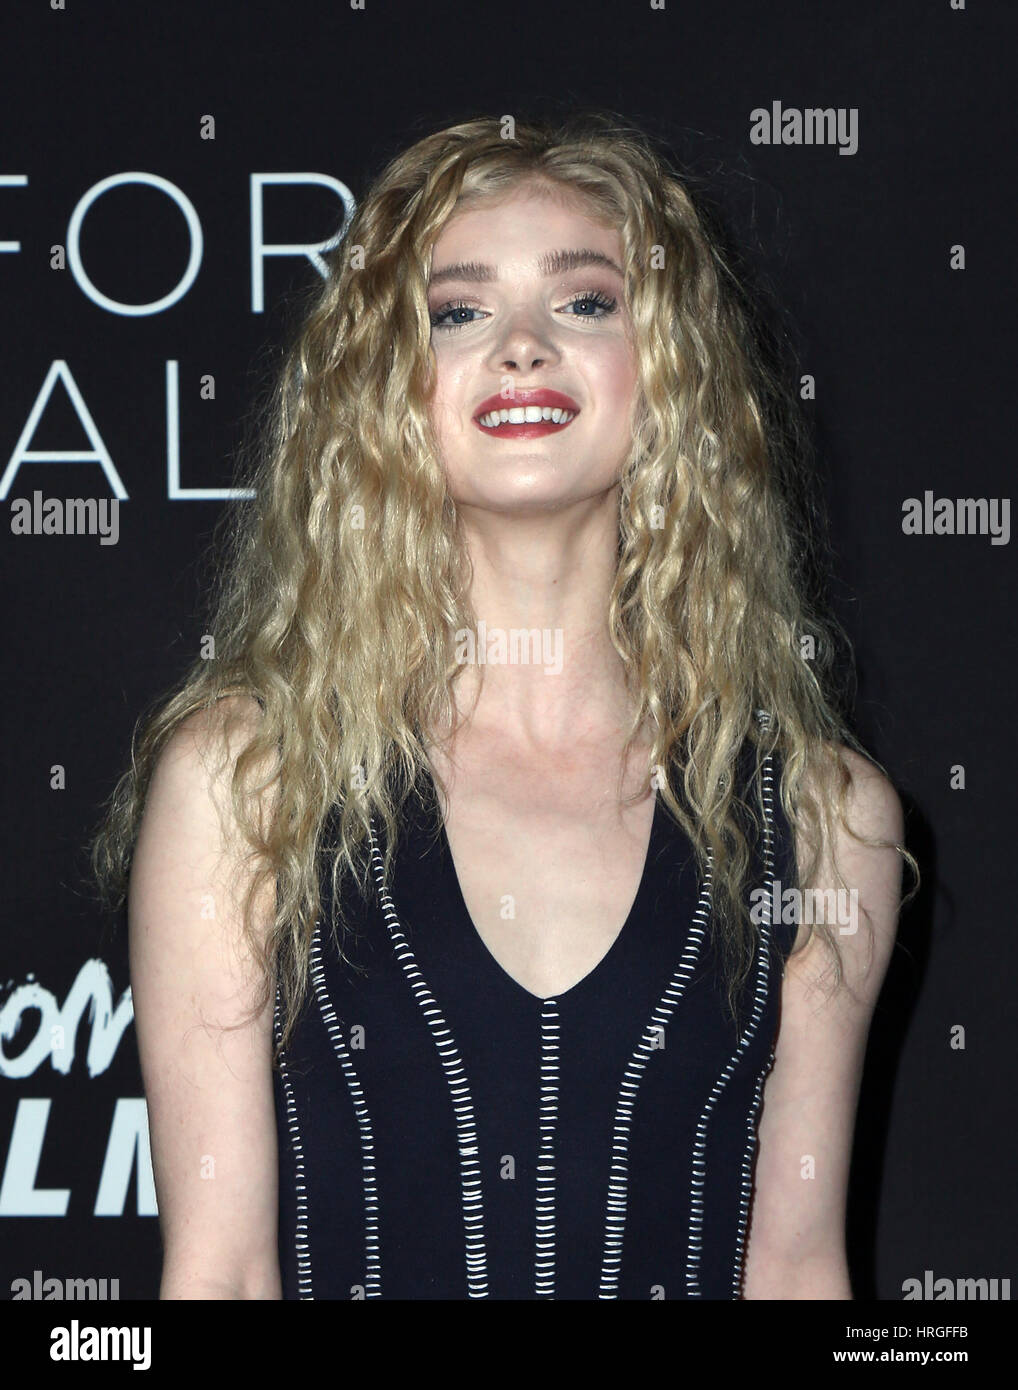 Los Angeles, Ca, USA. 01st Mar, 2017. Elena Kampouris, At The Premiere Of Open Road Films' 'Before I Fall' At Directors Guild Of America In California on March 01, 2017. Credit: Faye Sadou/Media Punch/Alamy Live News Stock Photo